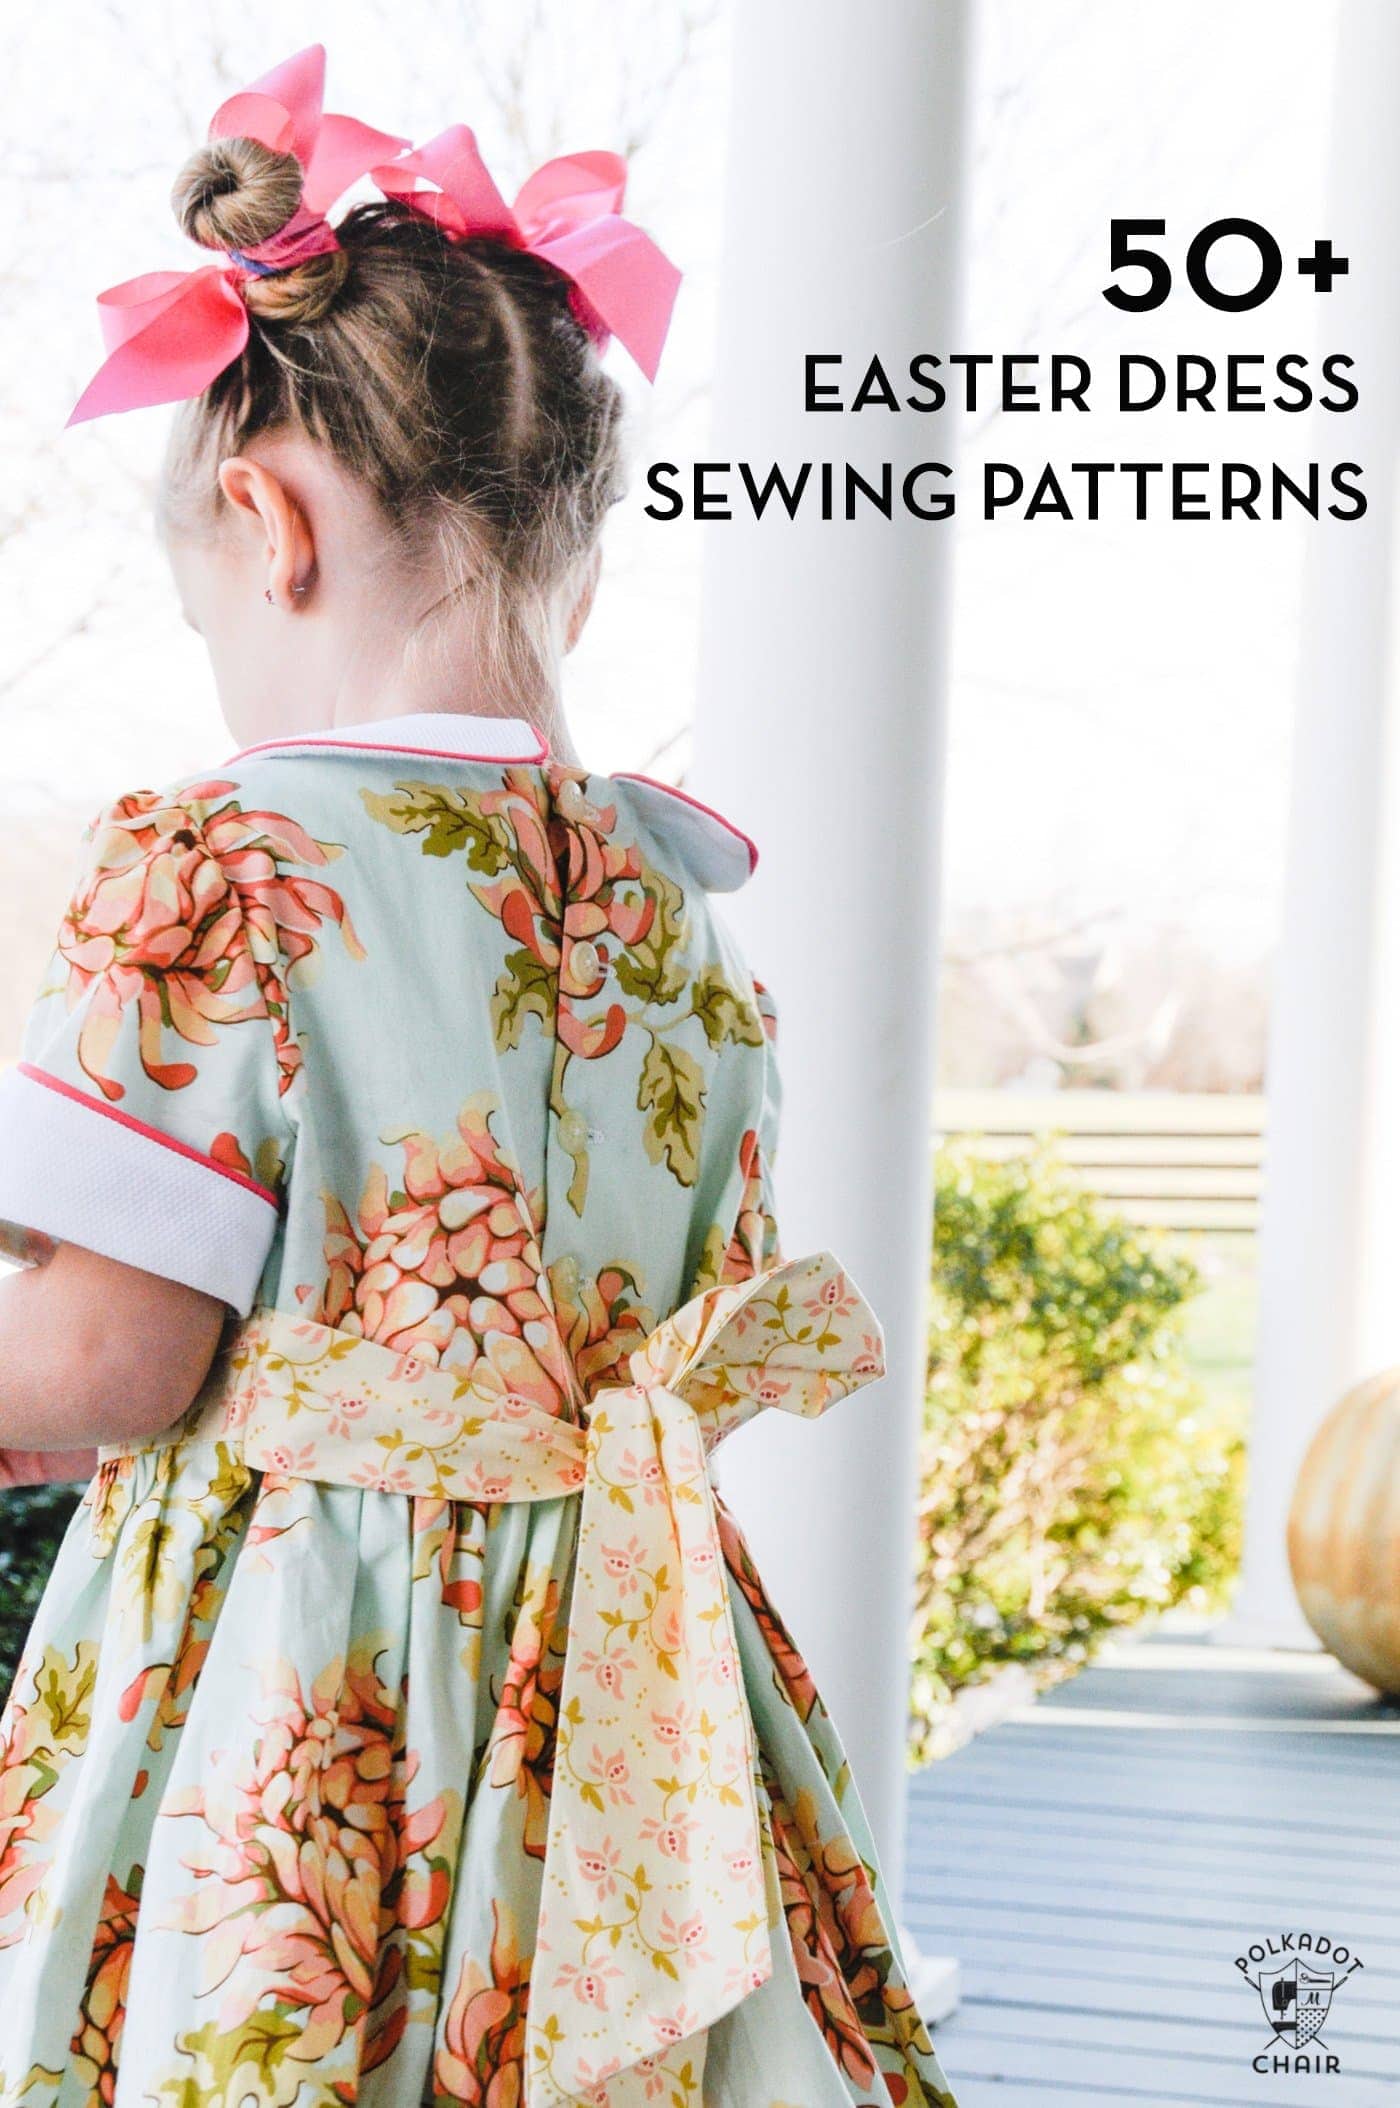 How to make a dress: 25 free dress patterns for girls + women | Dress  patterns free, Girls dress pattern free, Girls dress sewing patterns